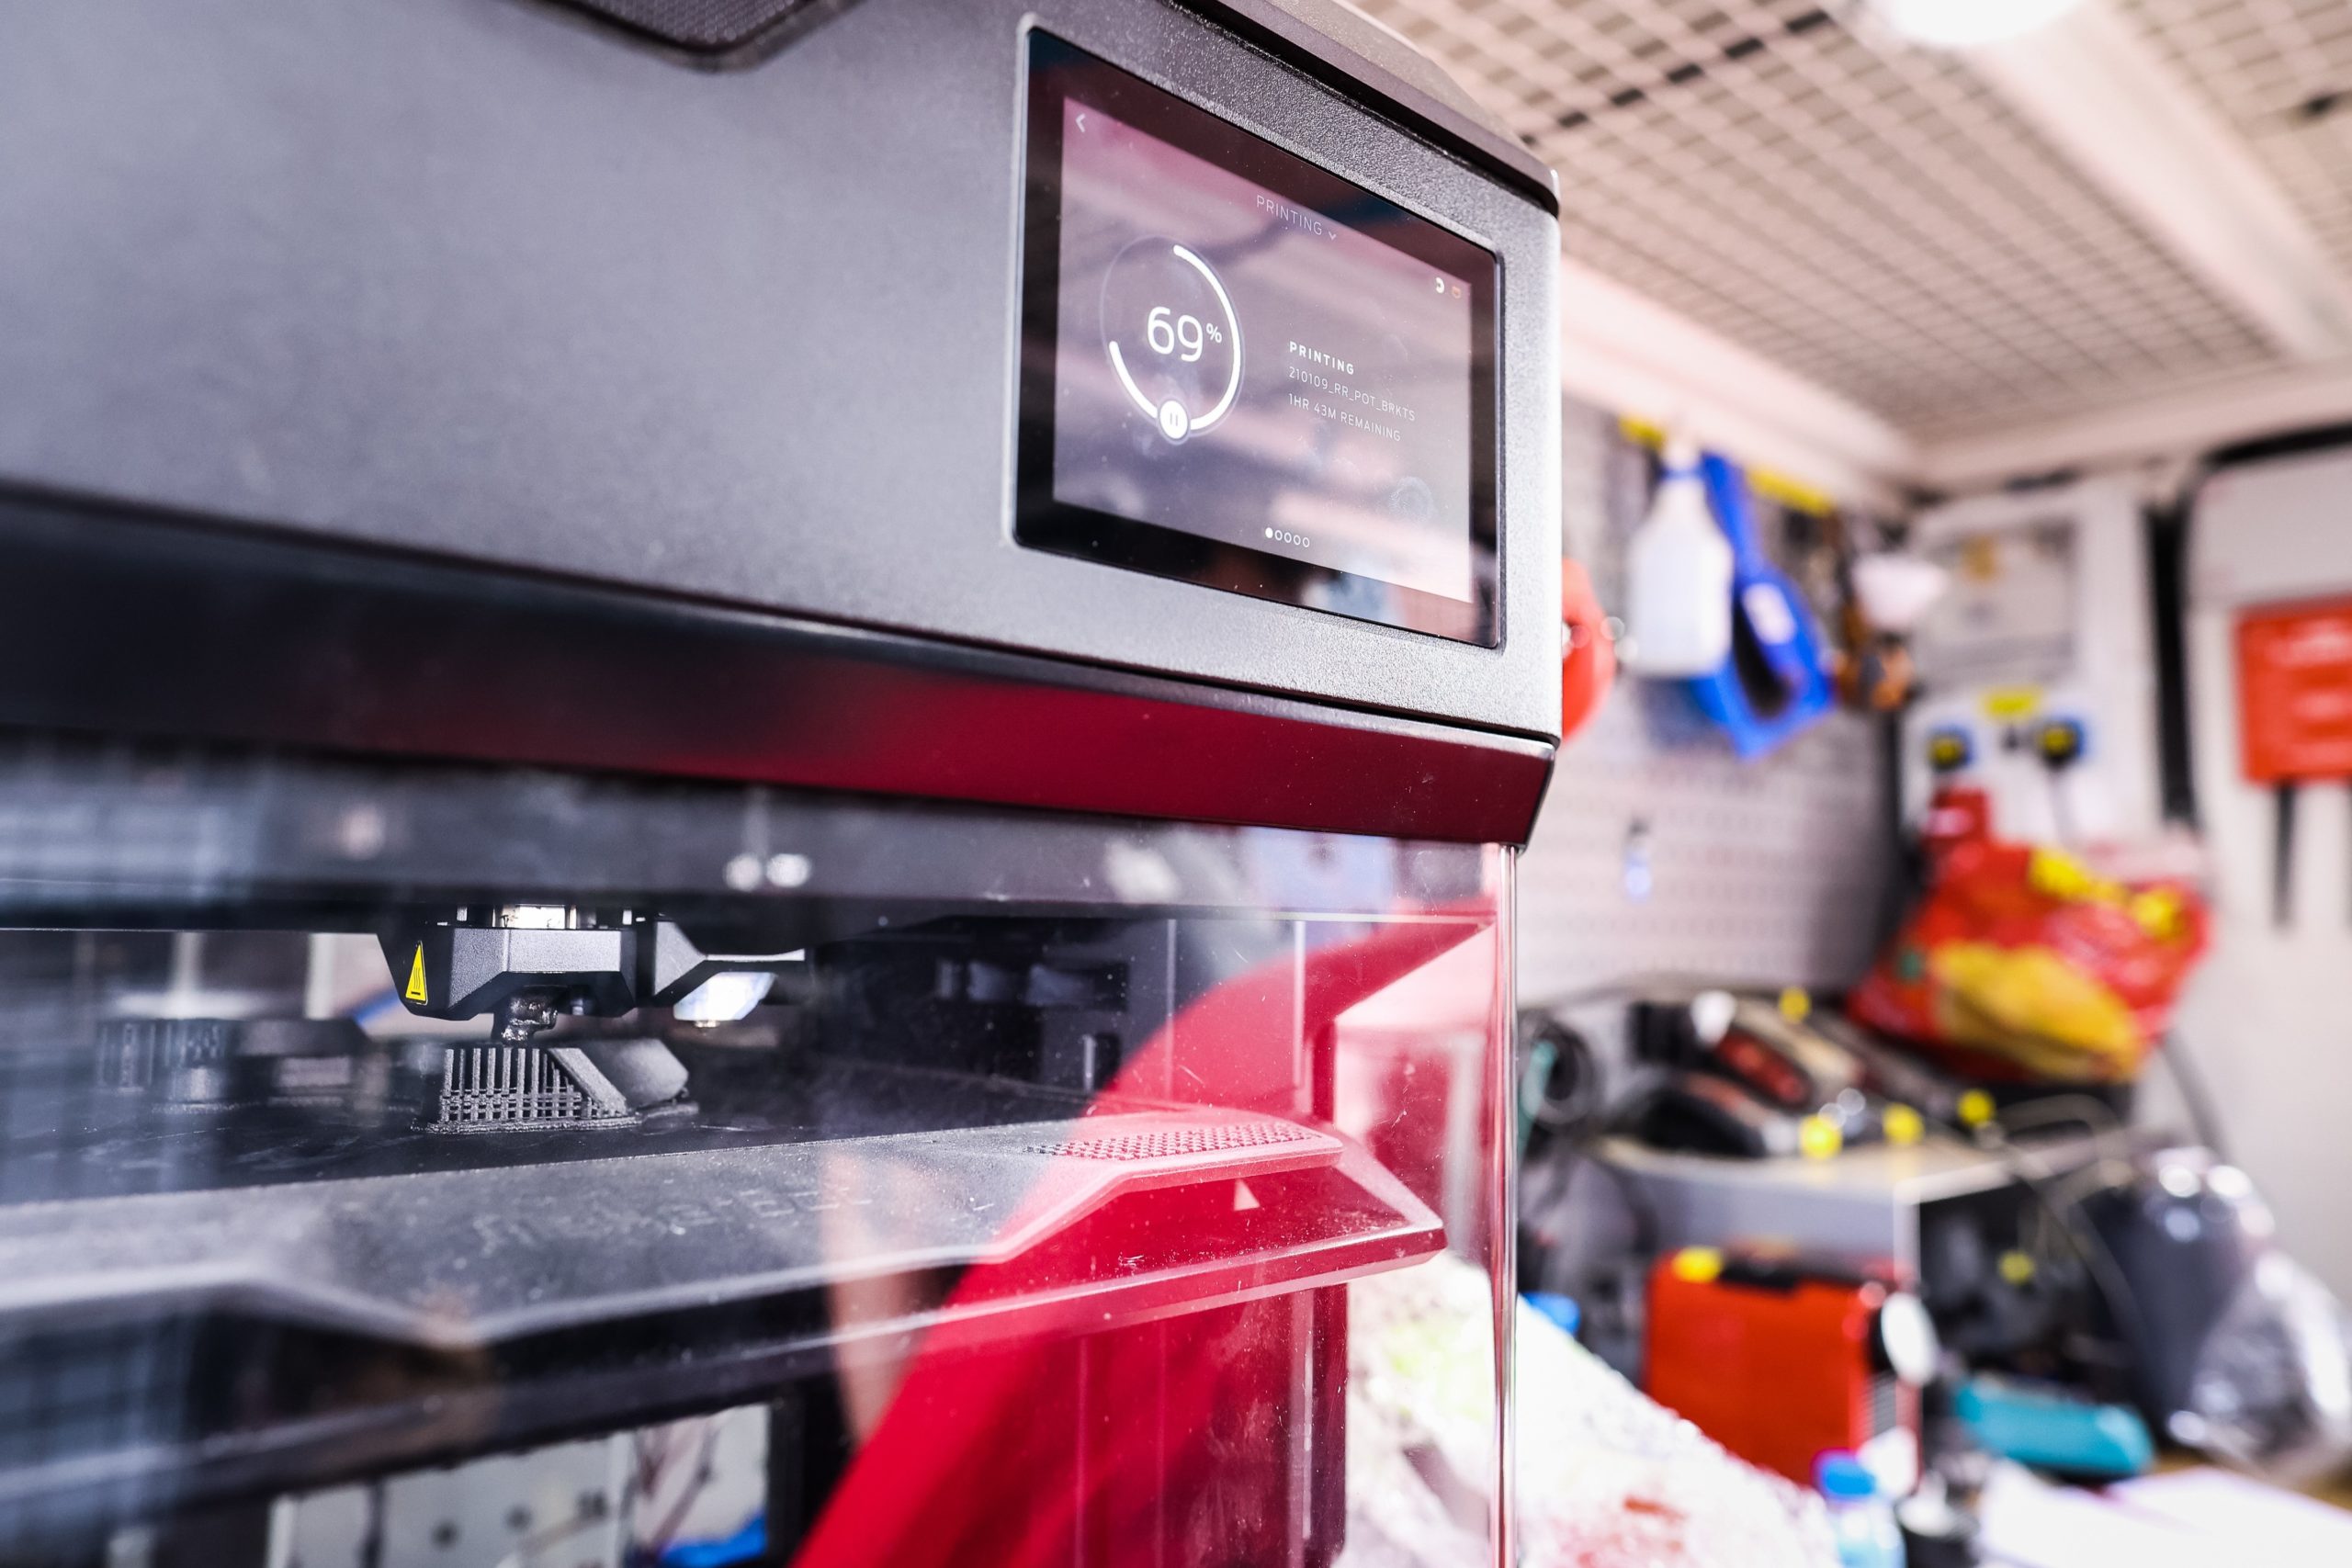 METHOD X operates conveniently on a support truck where parts can be printed as need during trials and the race itself. The enclosed heated chamber protects the parts from the harsh environmental conditions while printing.